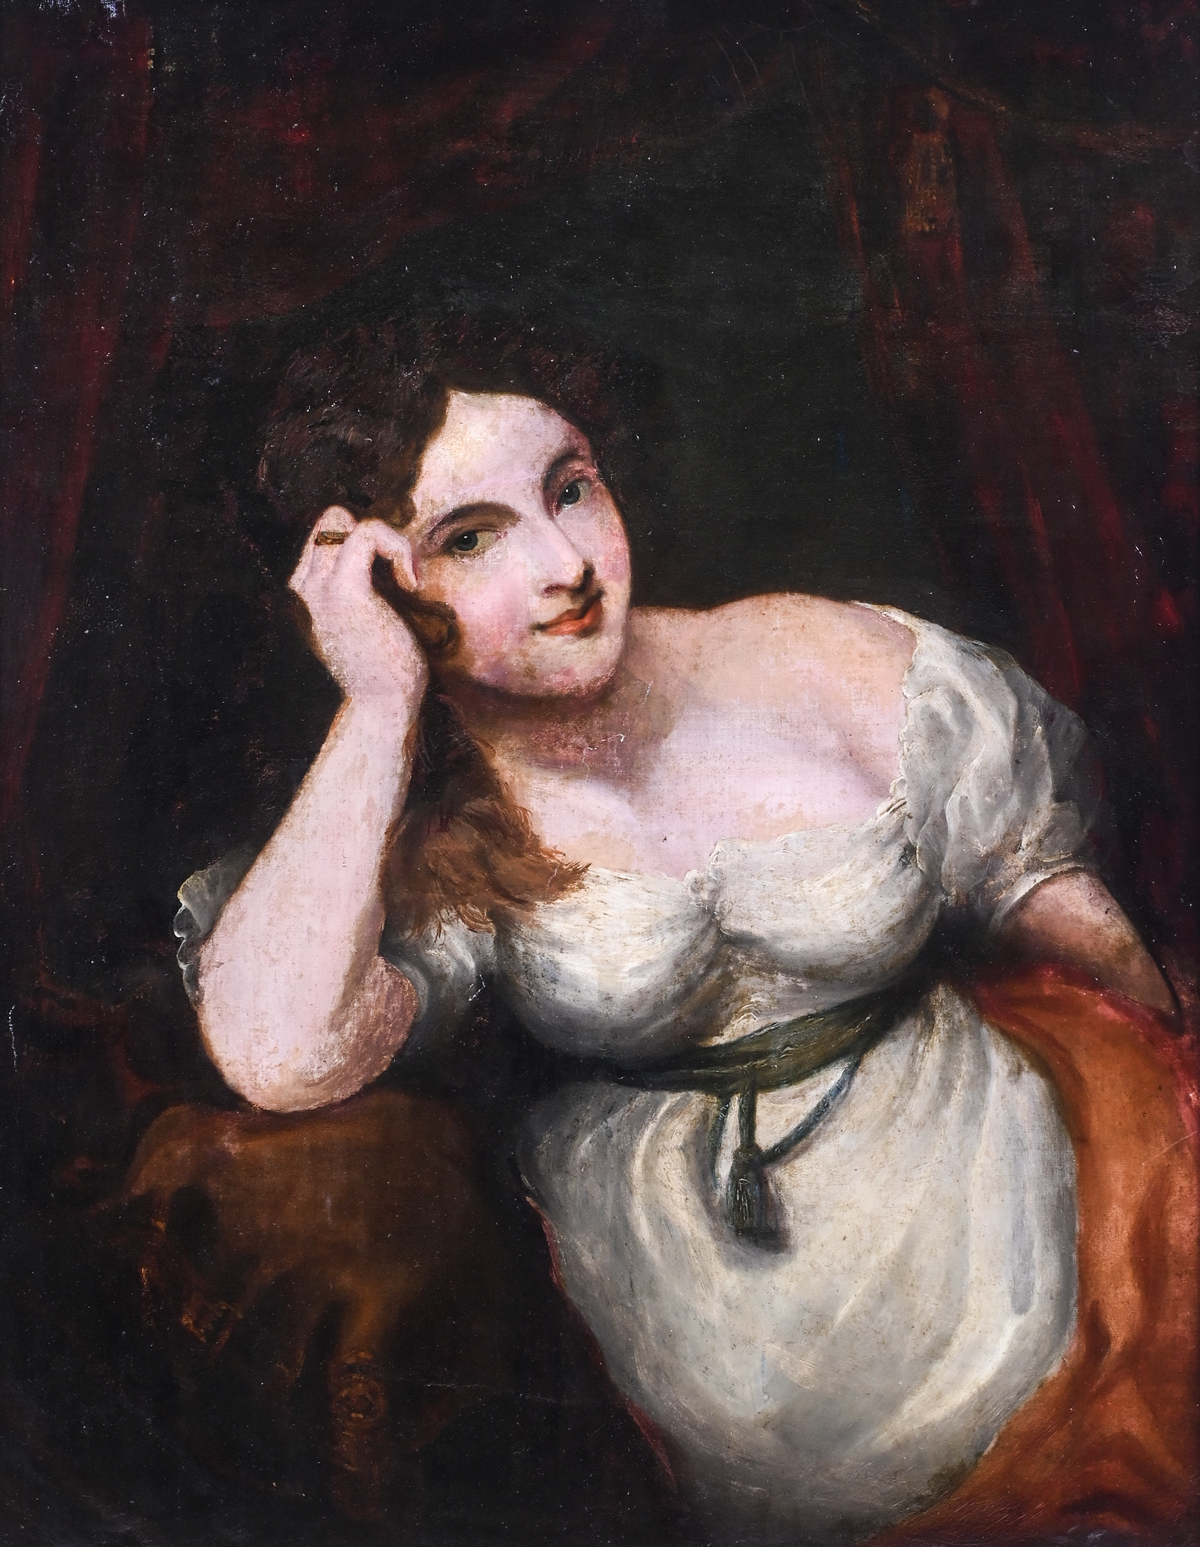 EARLY PORTRAIT PAINTING POSSIBLY